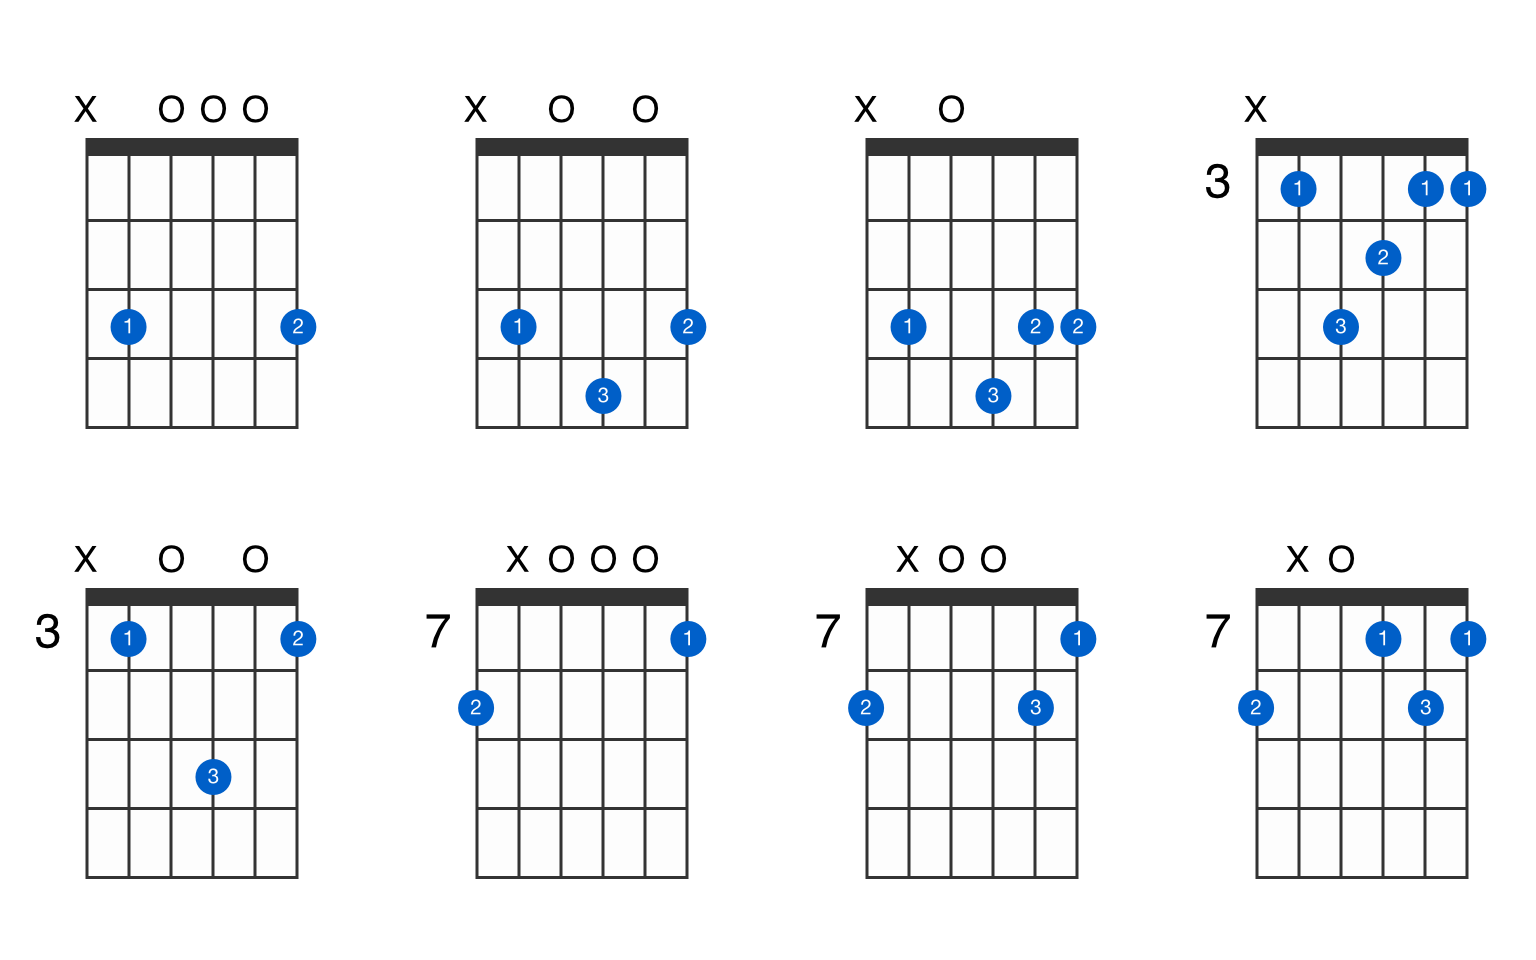 View guitar chords chart for C major 7th suspended 2nd chord along with sug...